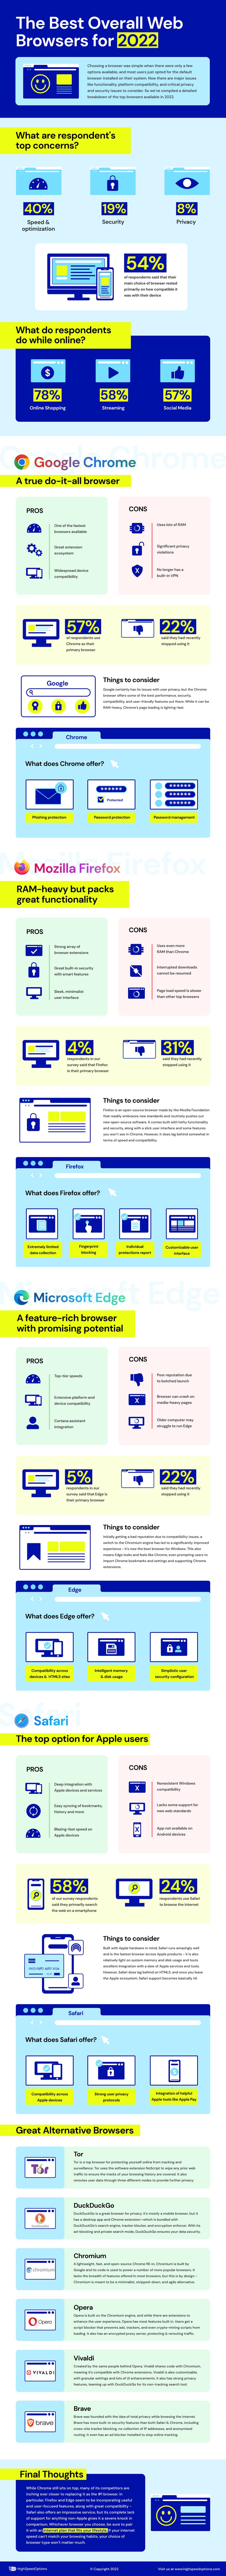 inforgraphic of the Best Browsers Overall